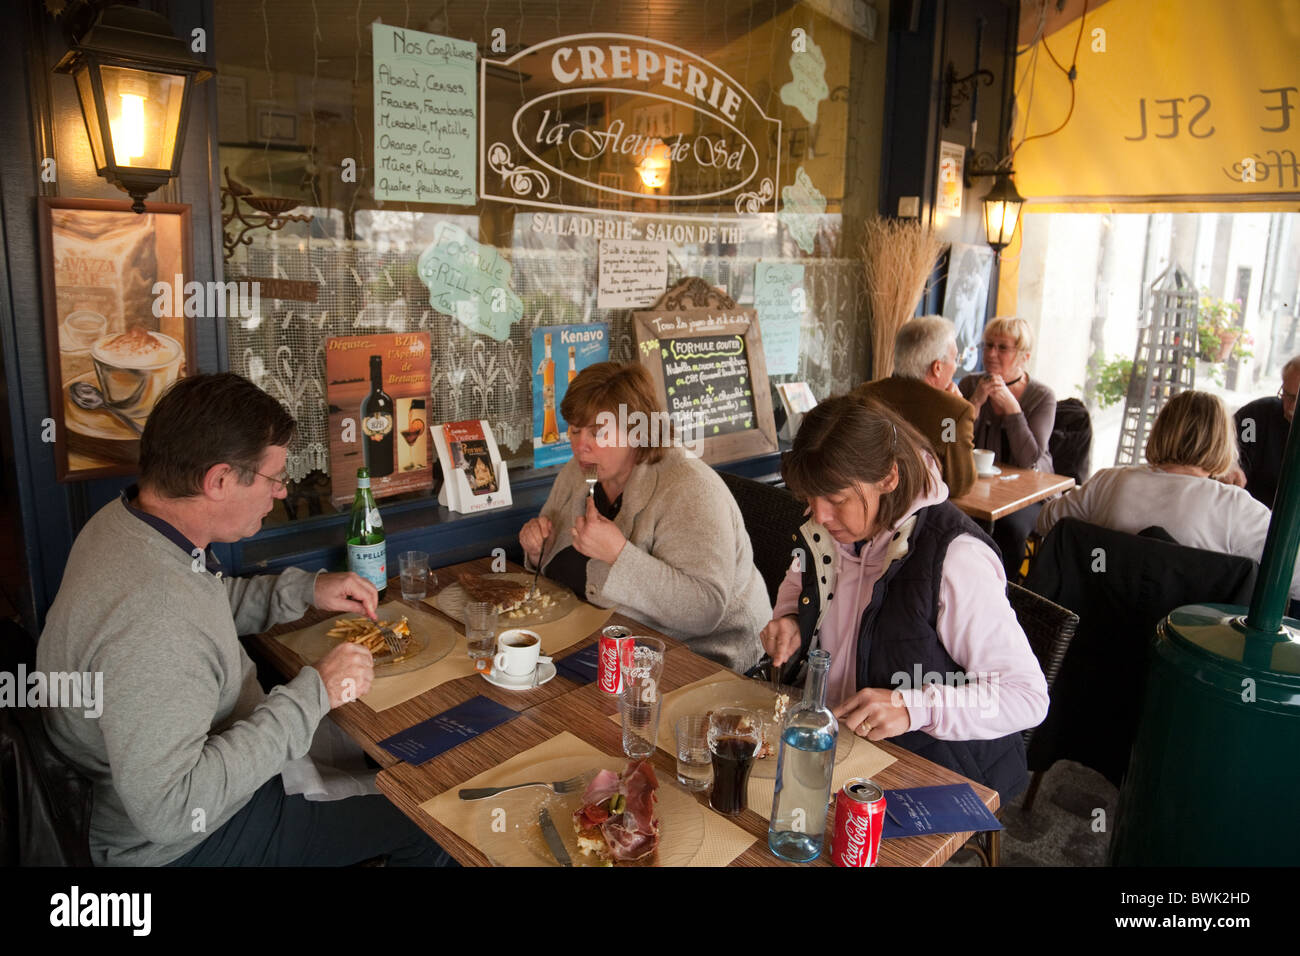 People eating in a traditional French creperie, Provins town, Seine et Marne, France Stock Photo